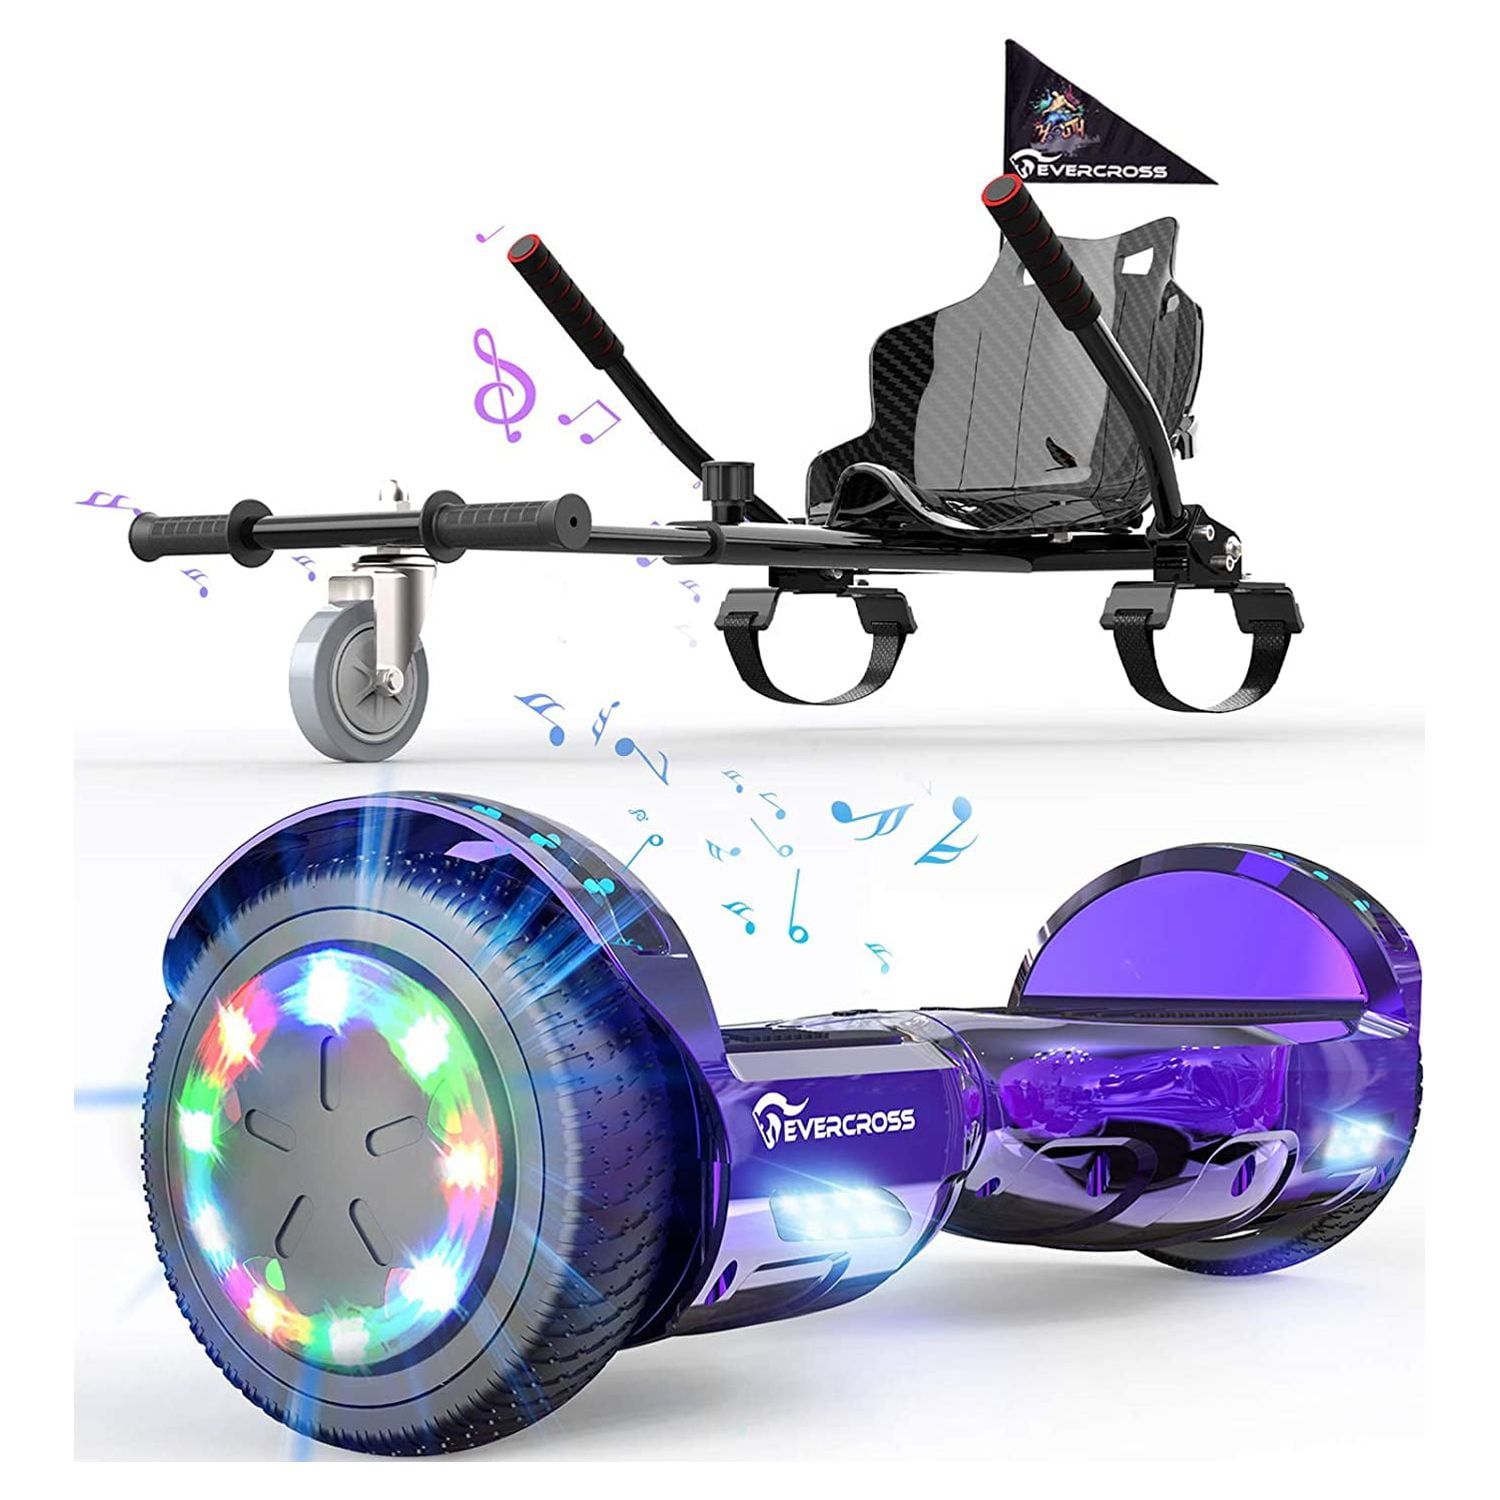 All-Terrain Hoverboard 8.5″ Big Wheel Self Balancing Scooter with Bluetooth  and LED Lights – Oz Robotics